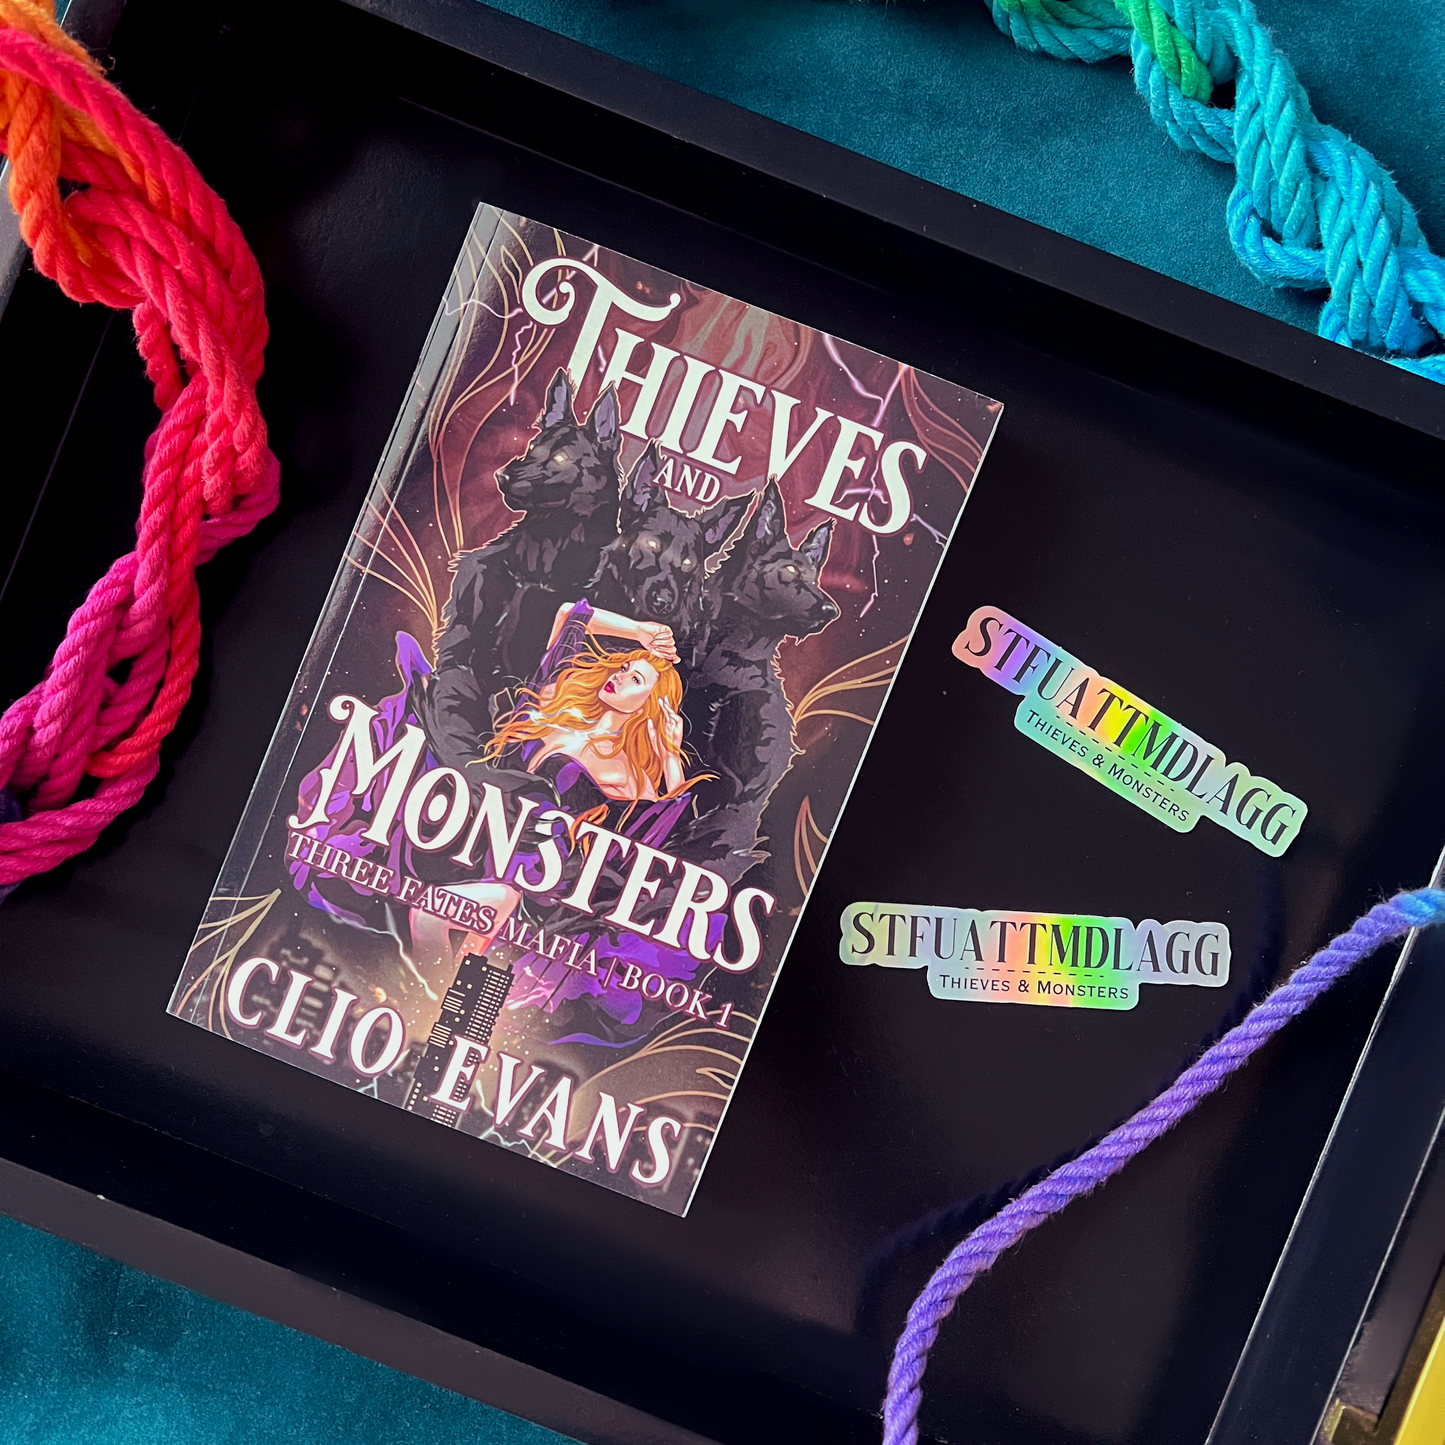 Thieves & Monsters- Signed Paperback + Sticker